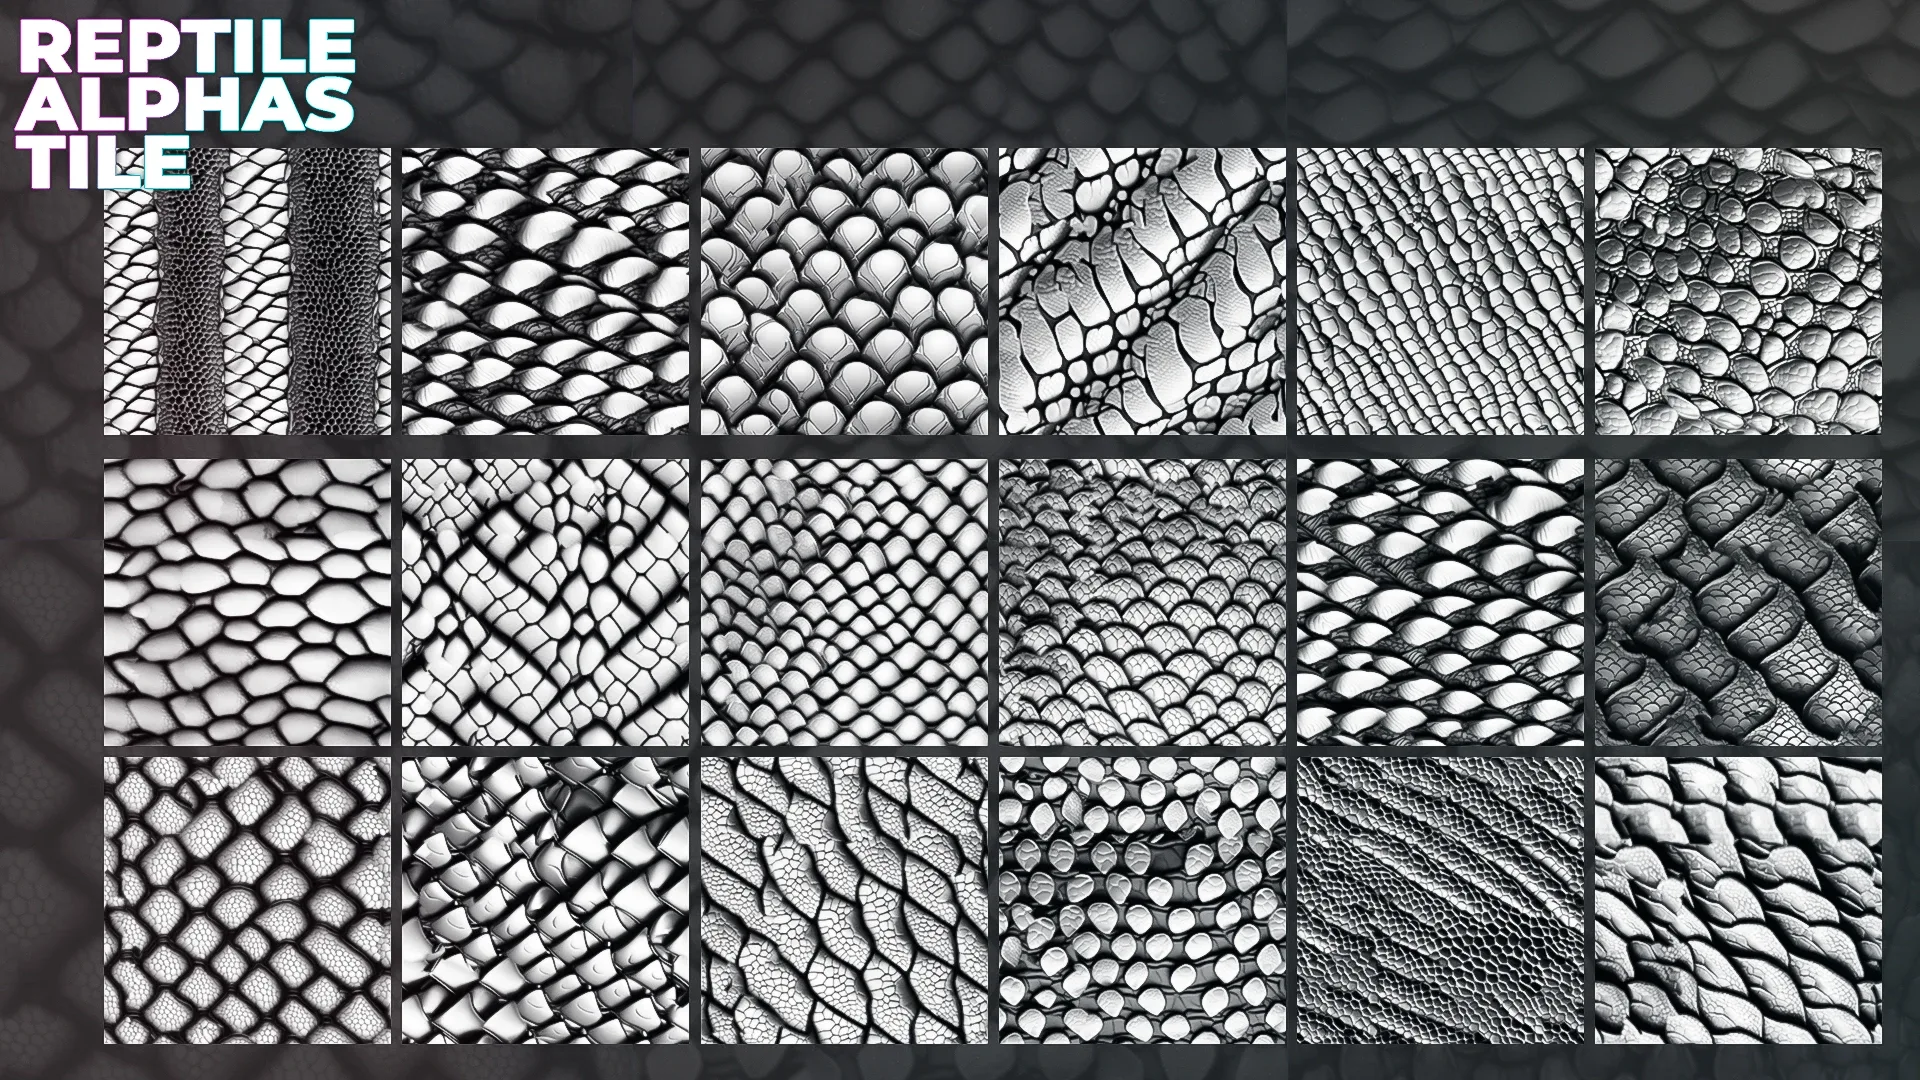 250+ Tileable Reptile, Dragon, Snake Skin Alphas for ZBrush (Displacement map) vol.5